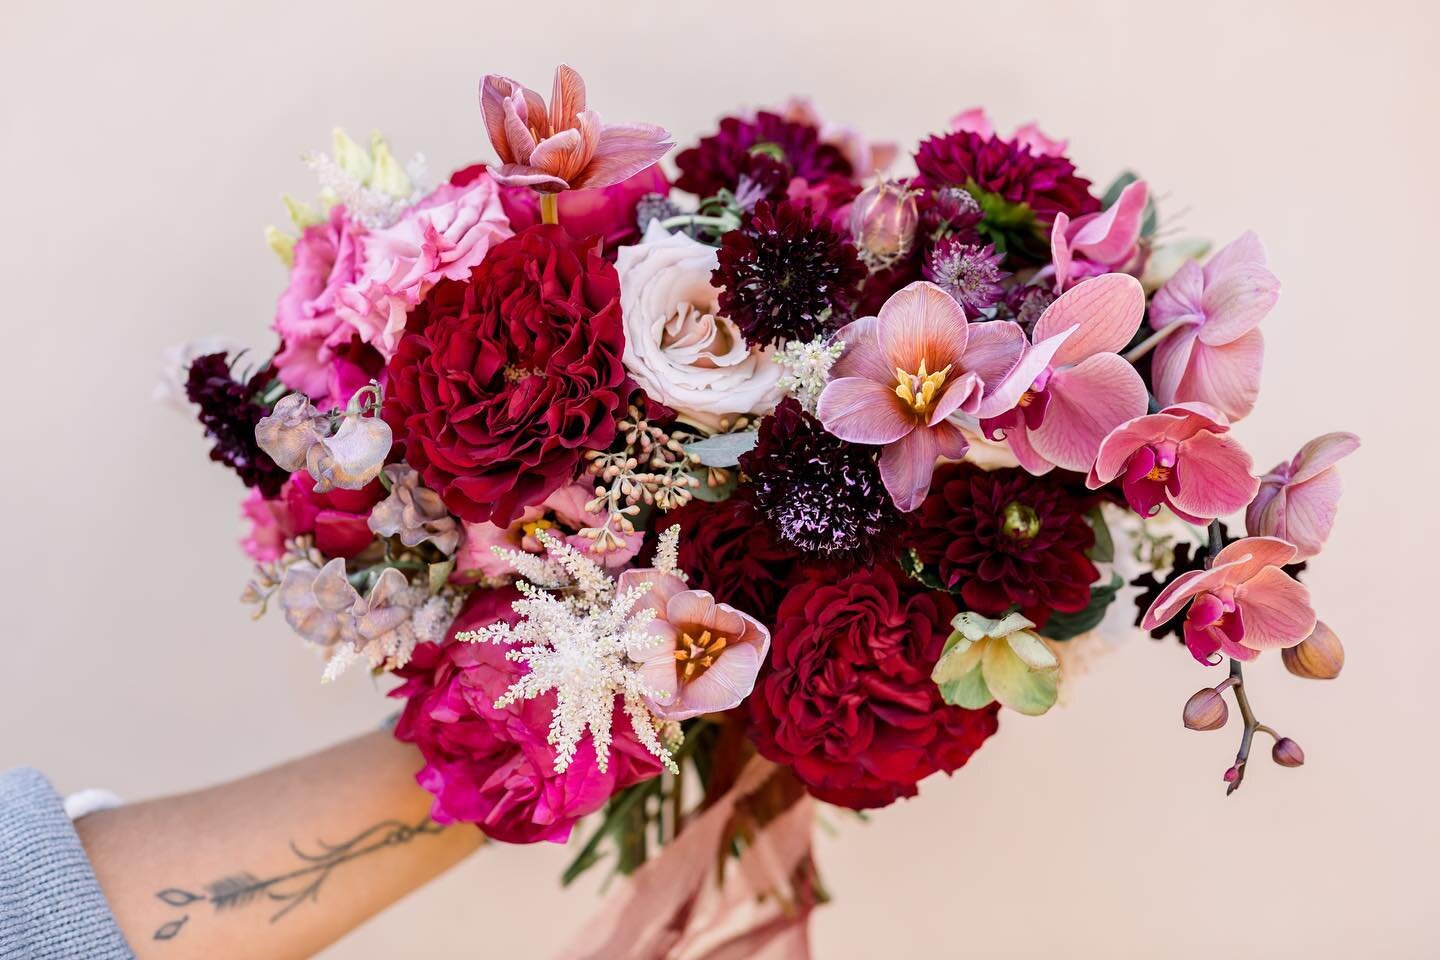 The most gorgeous bouquet. 

Concept and design: @luxeatlantaevents + @tenpointfloraldesign 
Planning: @luxeatlantaevents 
Florals: @tenpointfloraldesign 
Venue: @montaluce_winery 
Photography: @arrowedbeginnings